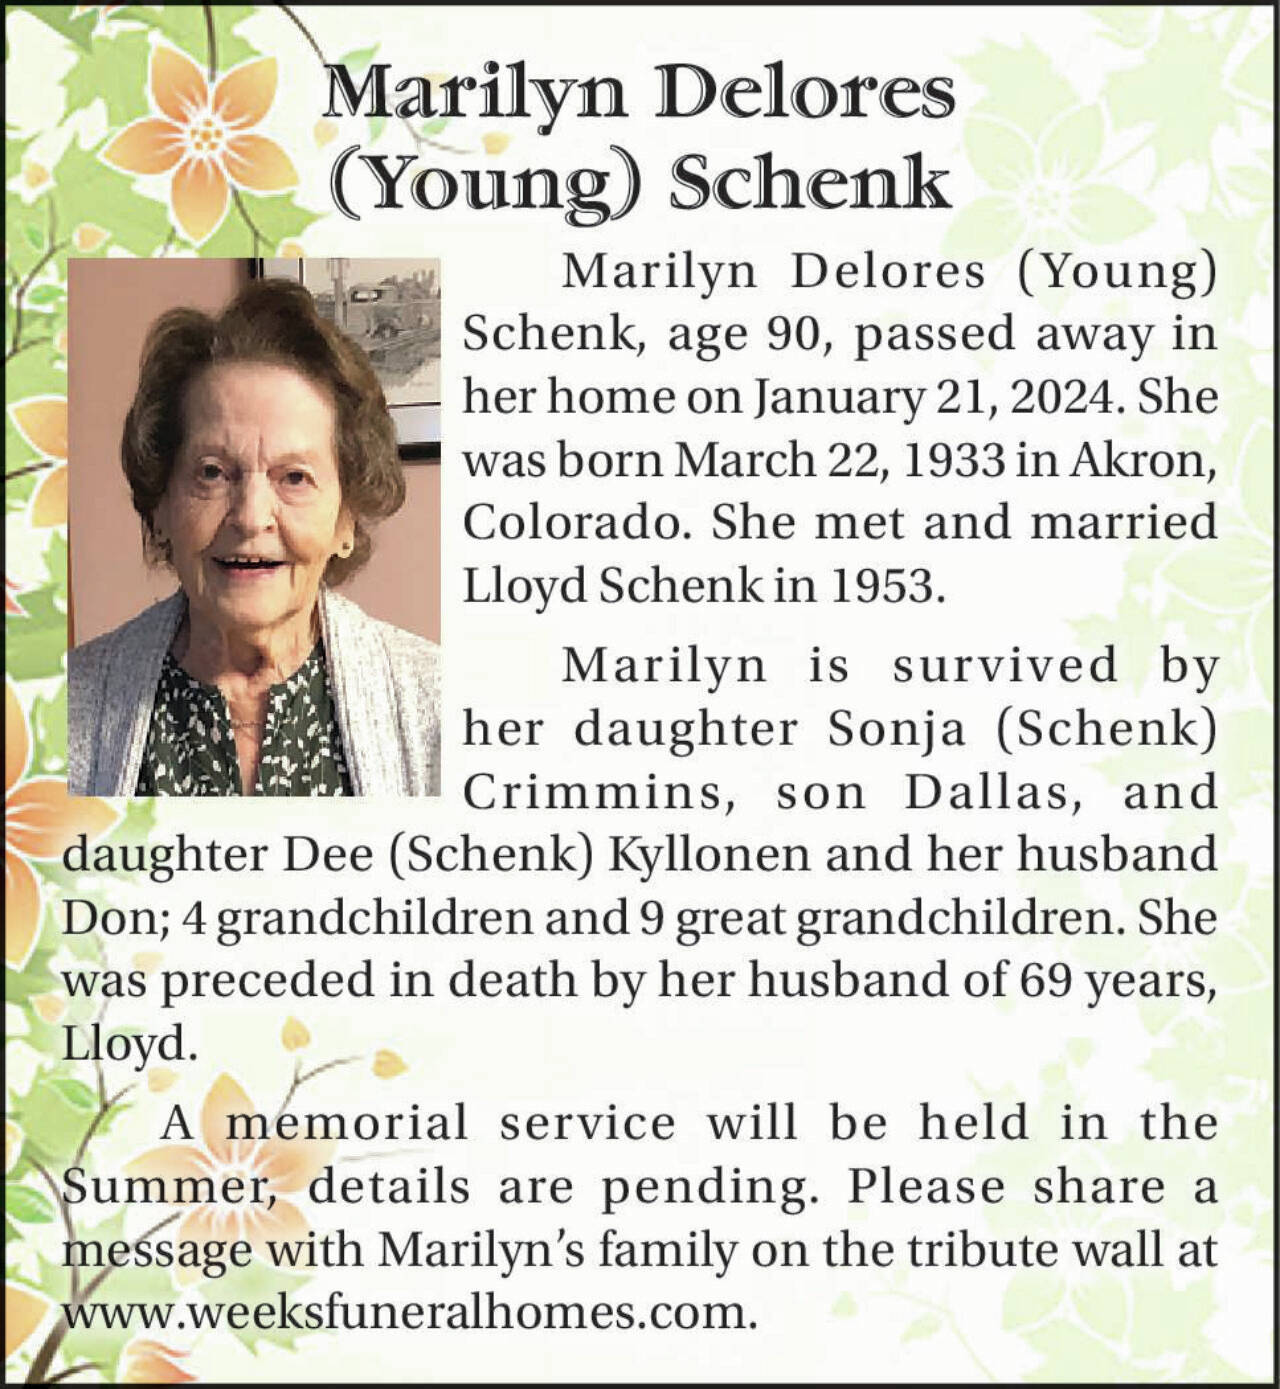 Marilyn Delores (Young) Schenk